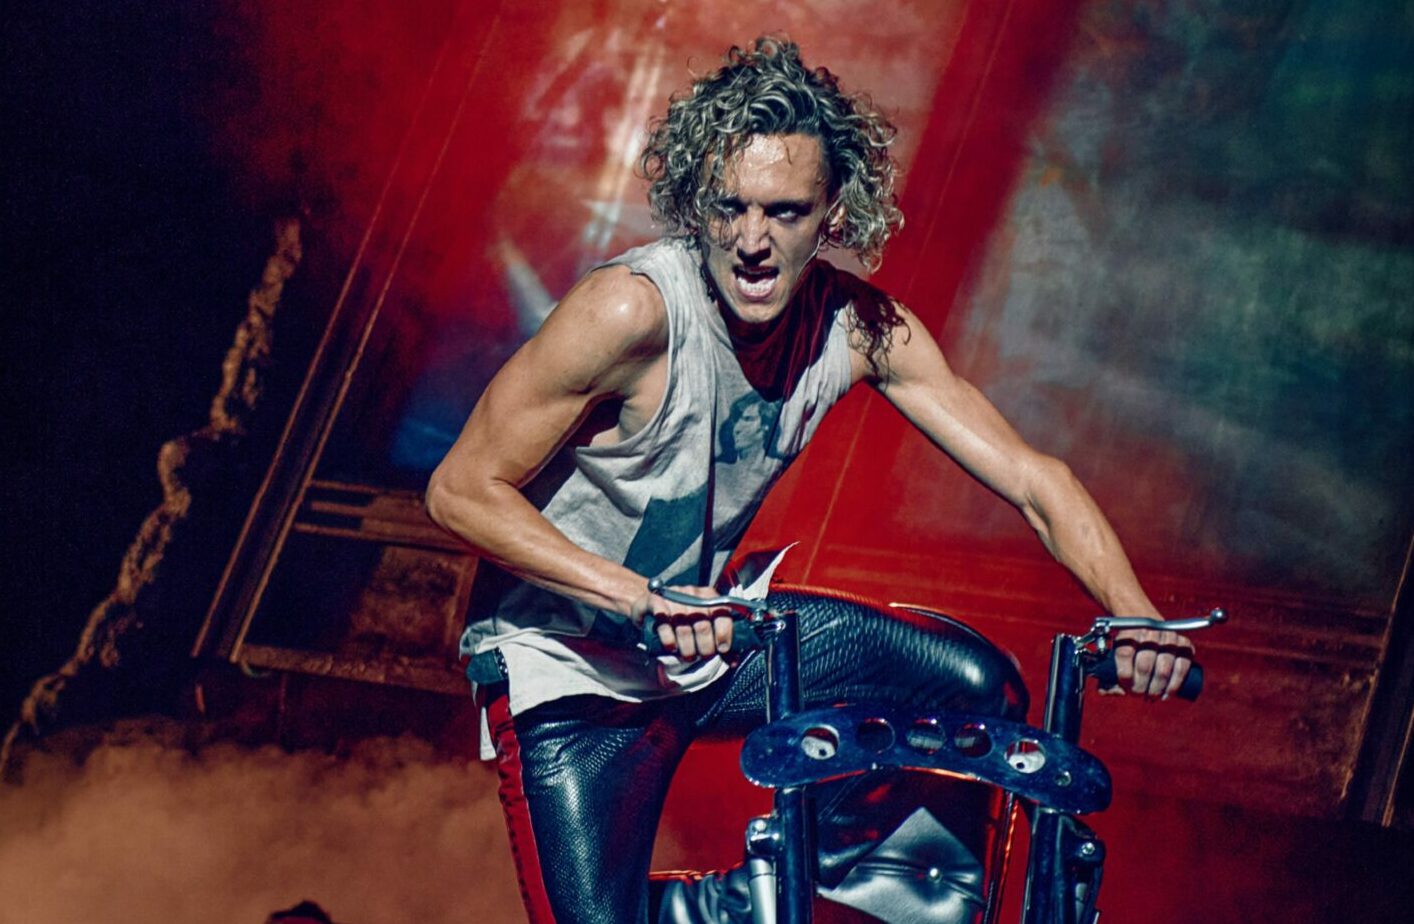 Glenn Adamson on stage as Strat in Bat Out Of Hell